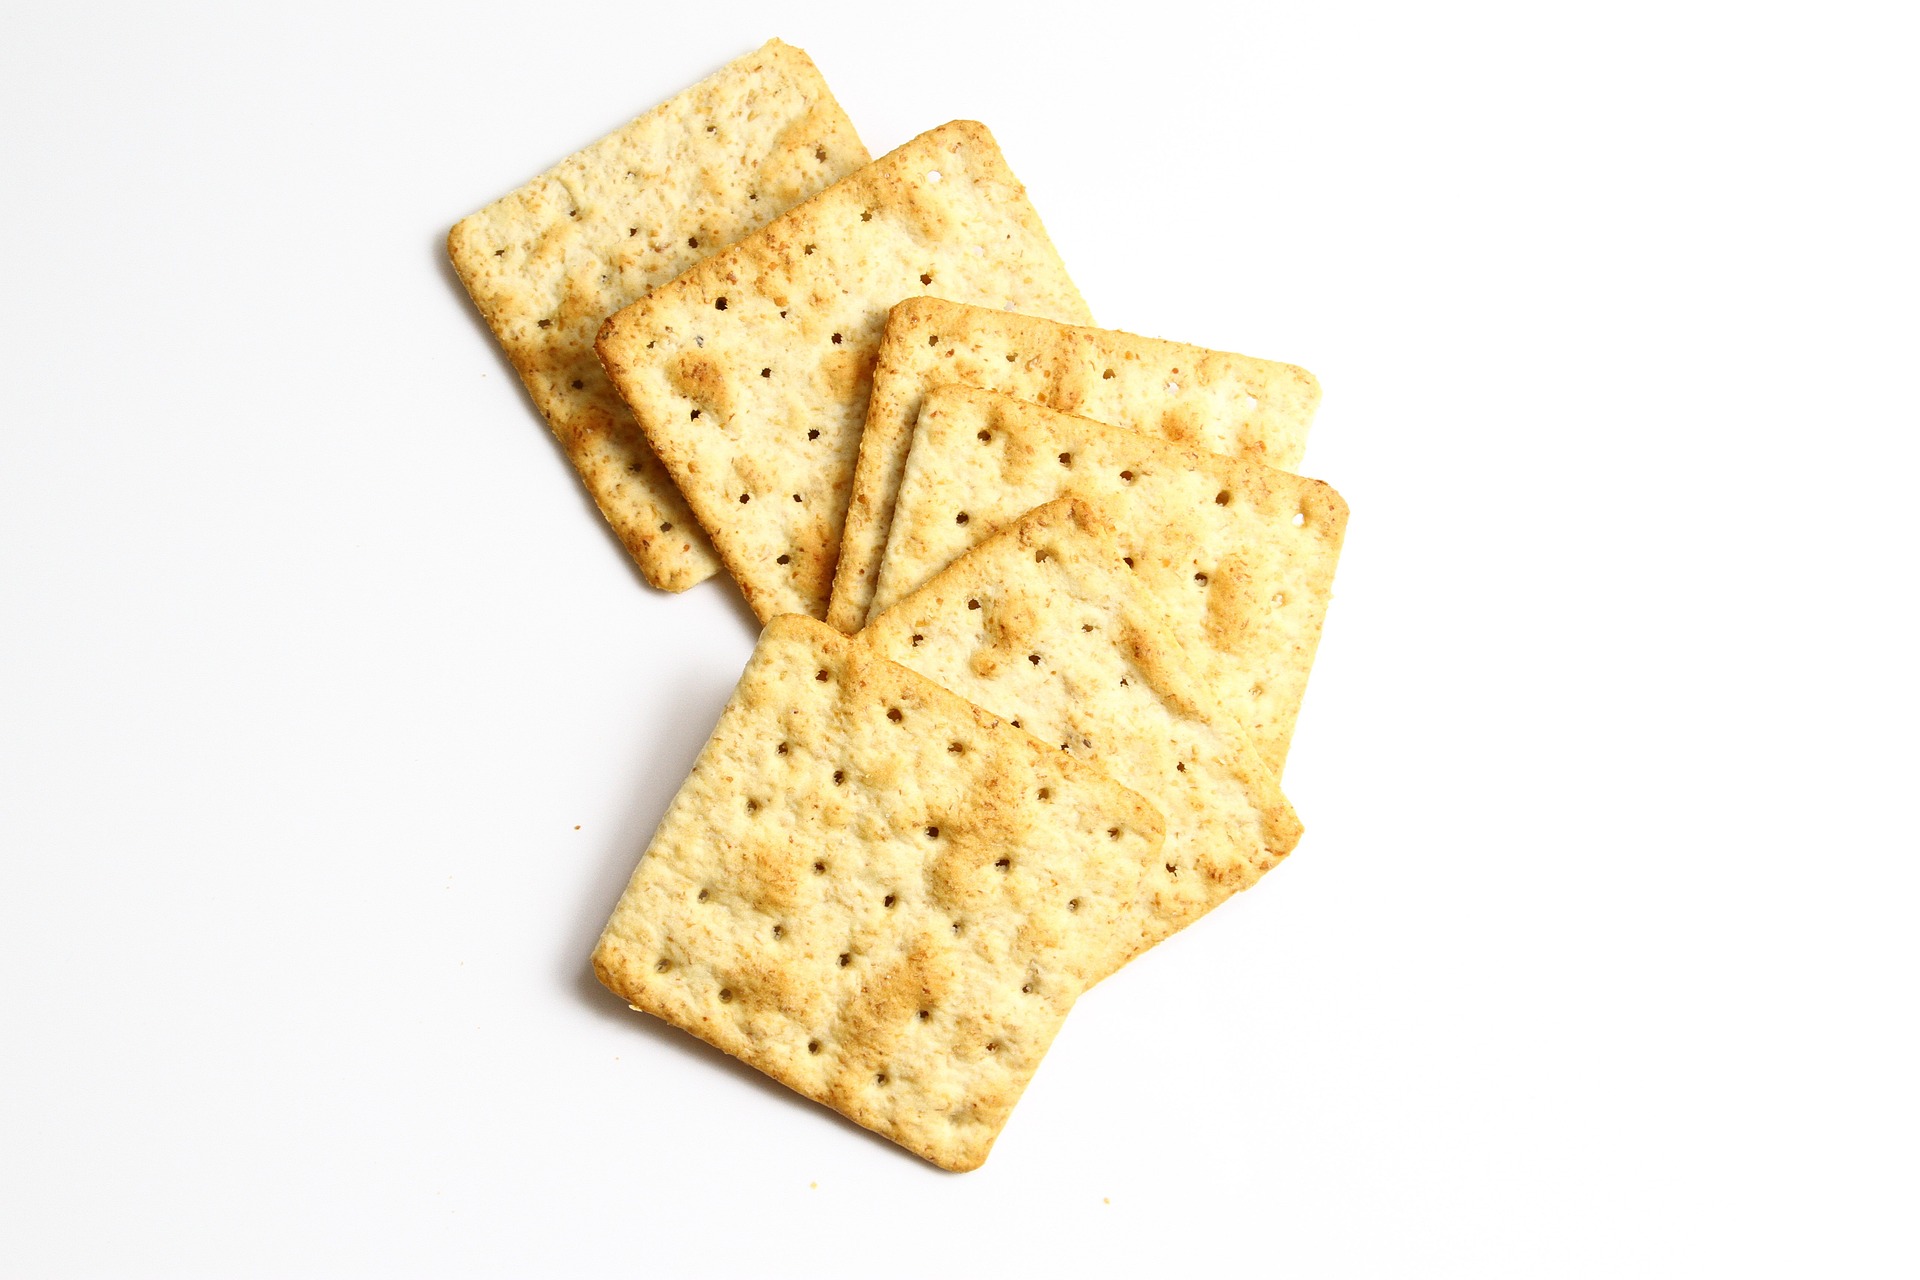 biscuit crackers g0e2f6a650 1920